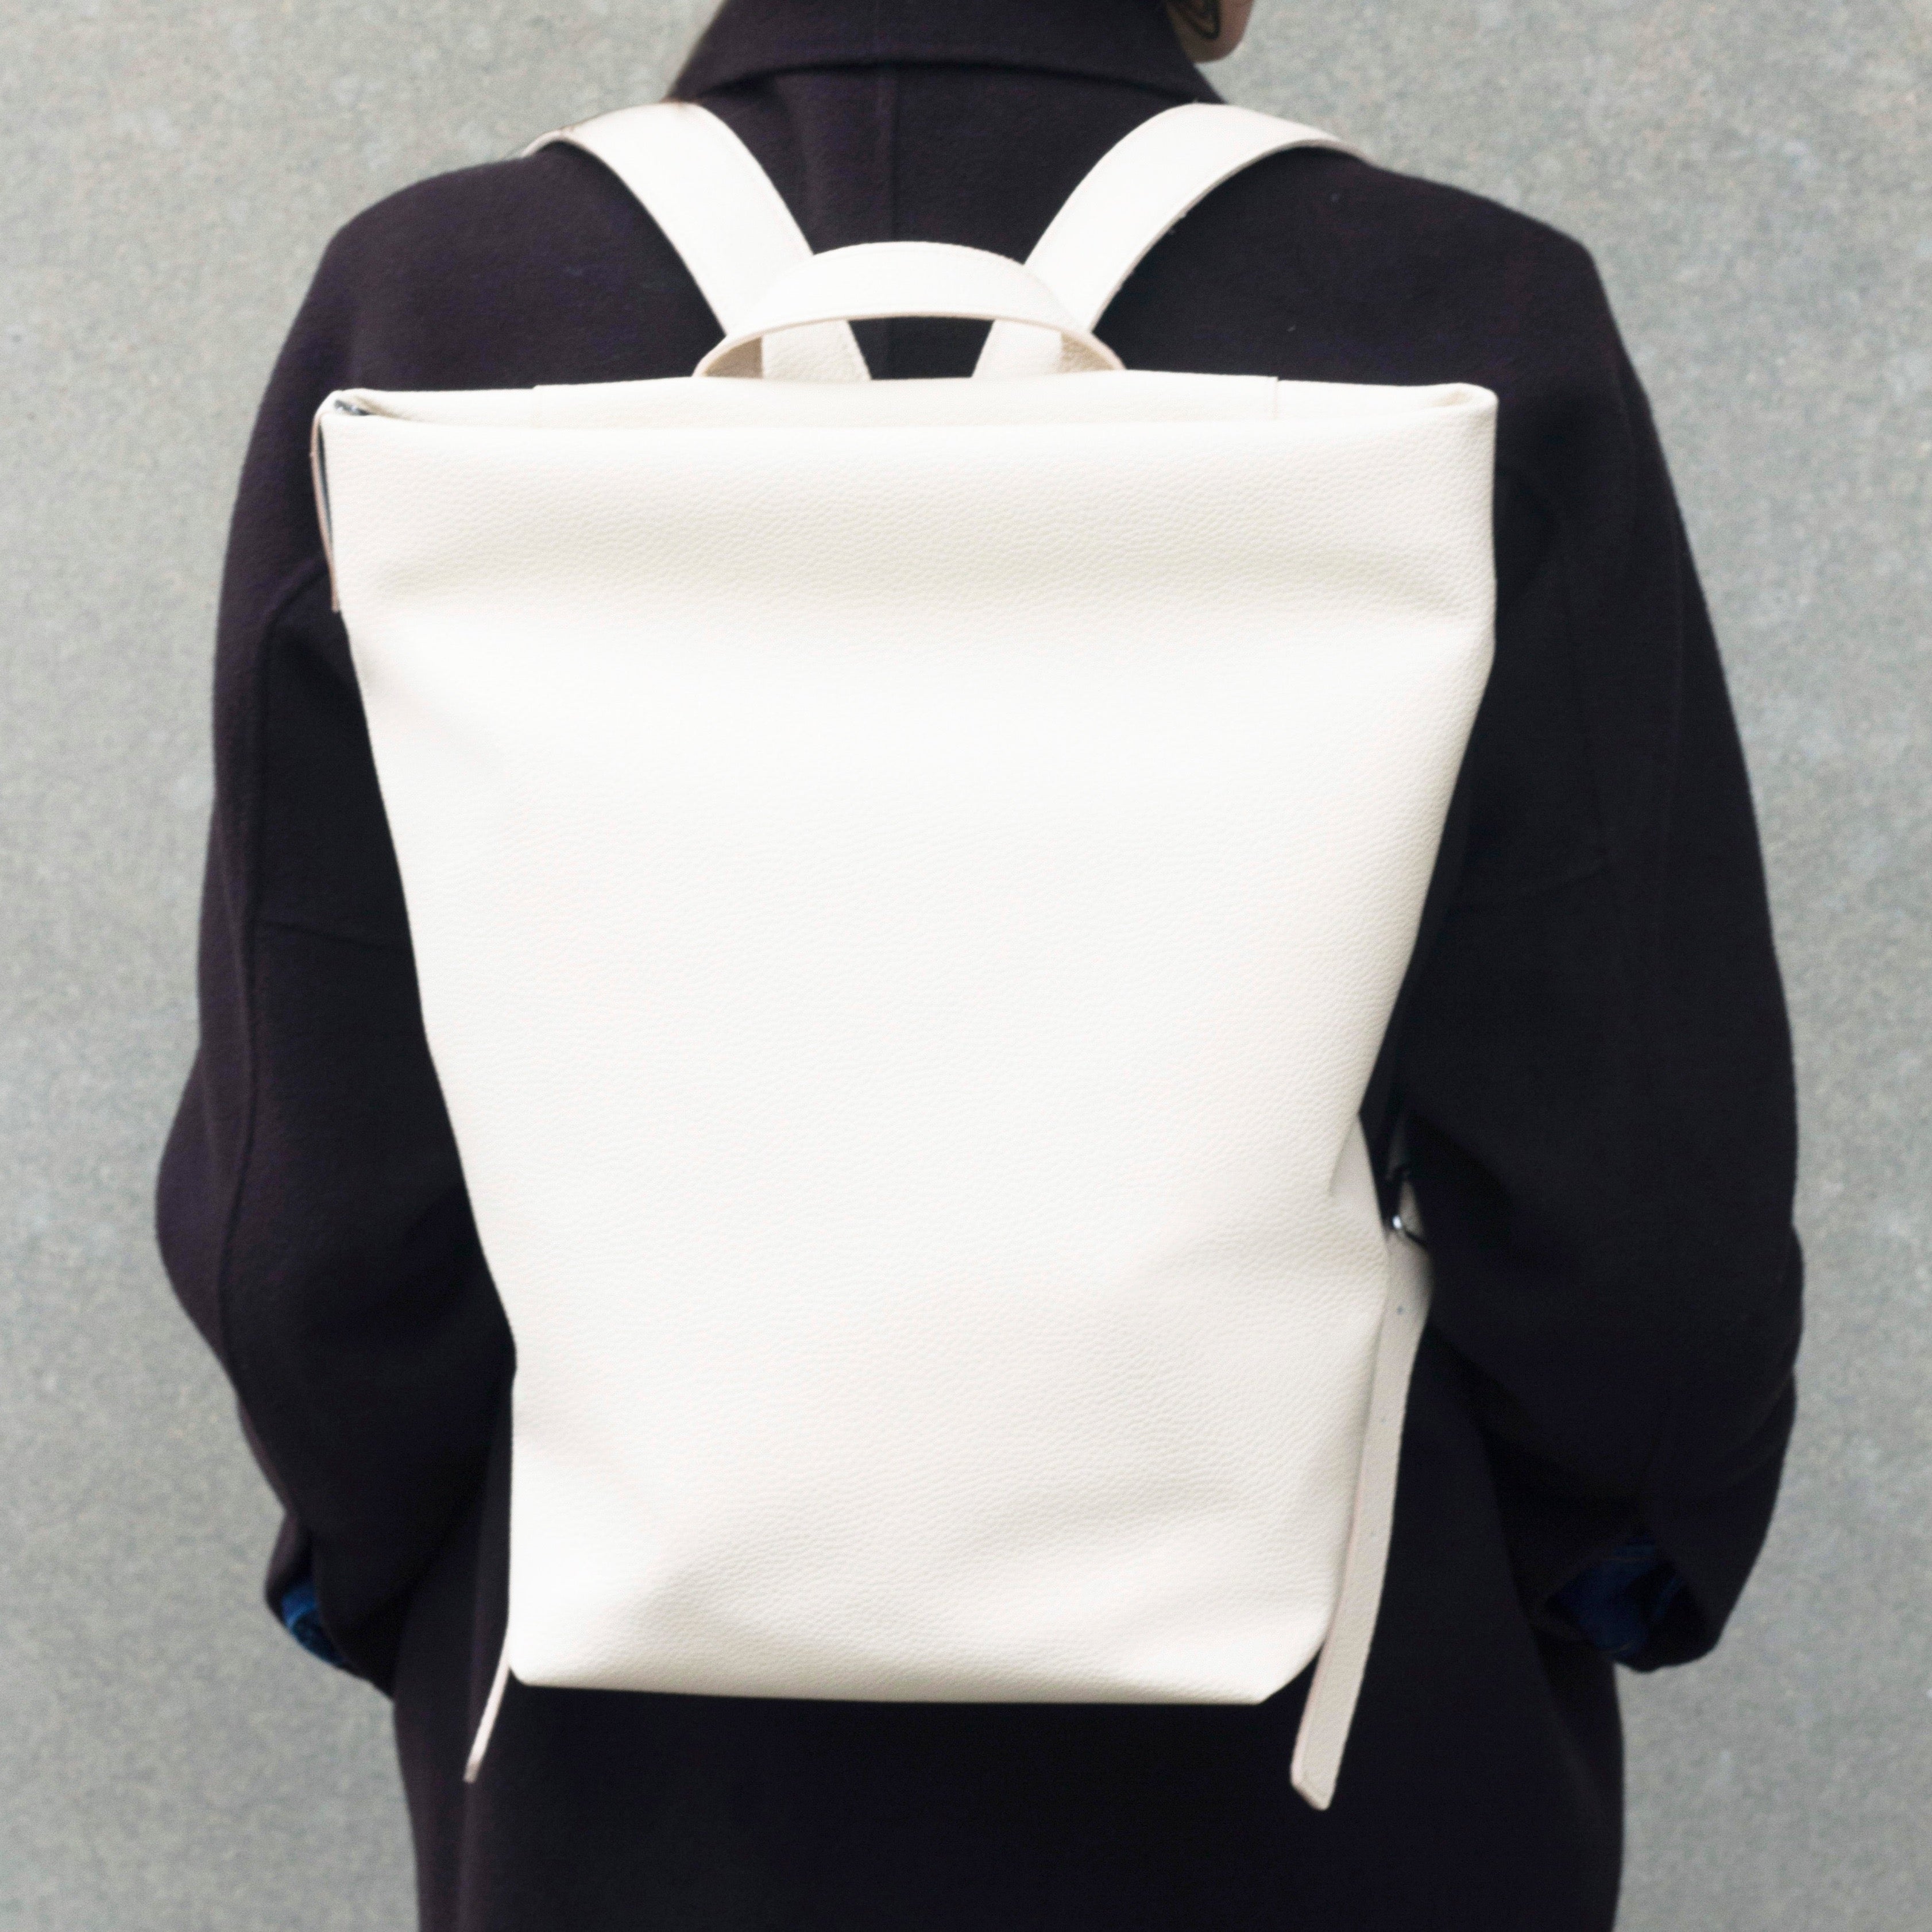 Lauriston Oat Backpack